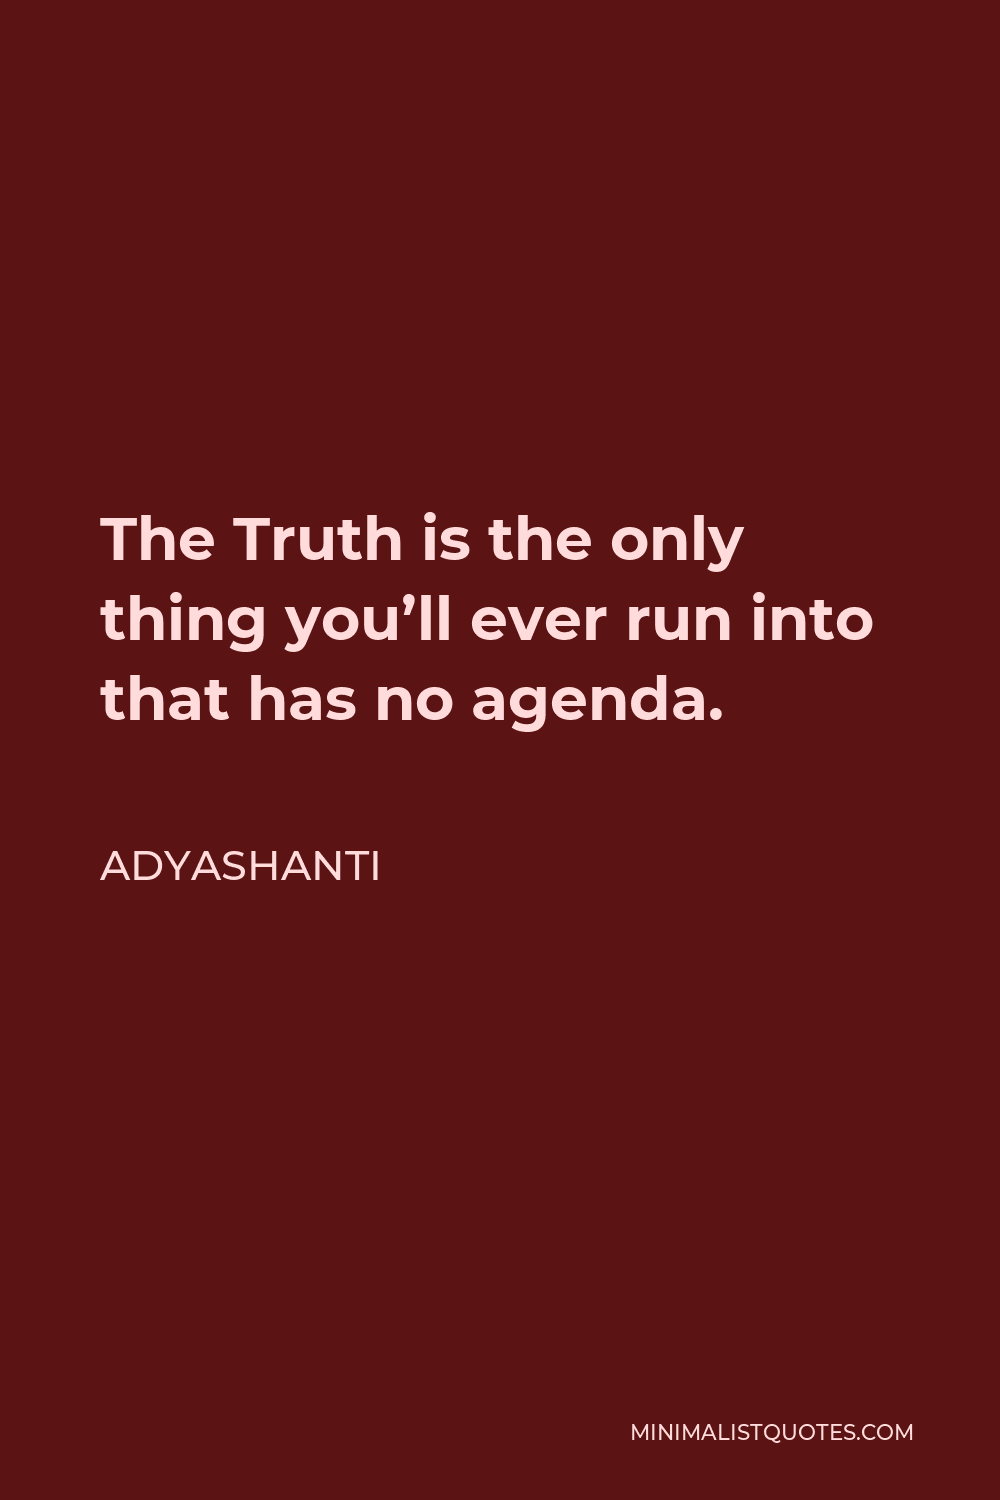 Adyashanti Quote - The Truth is the only thing you’ll ever run into that has no agenda.